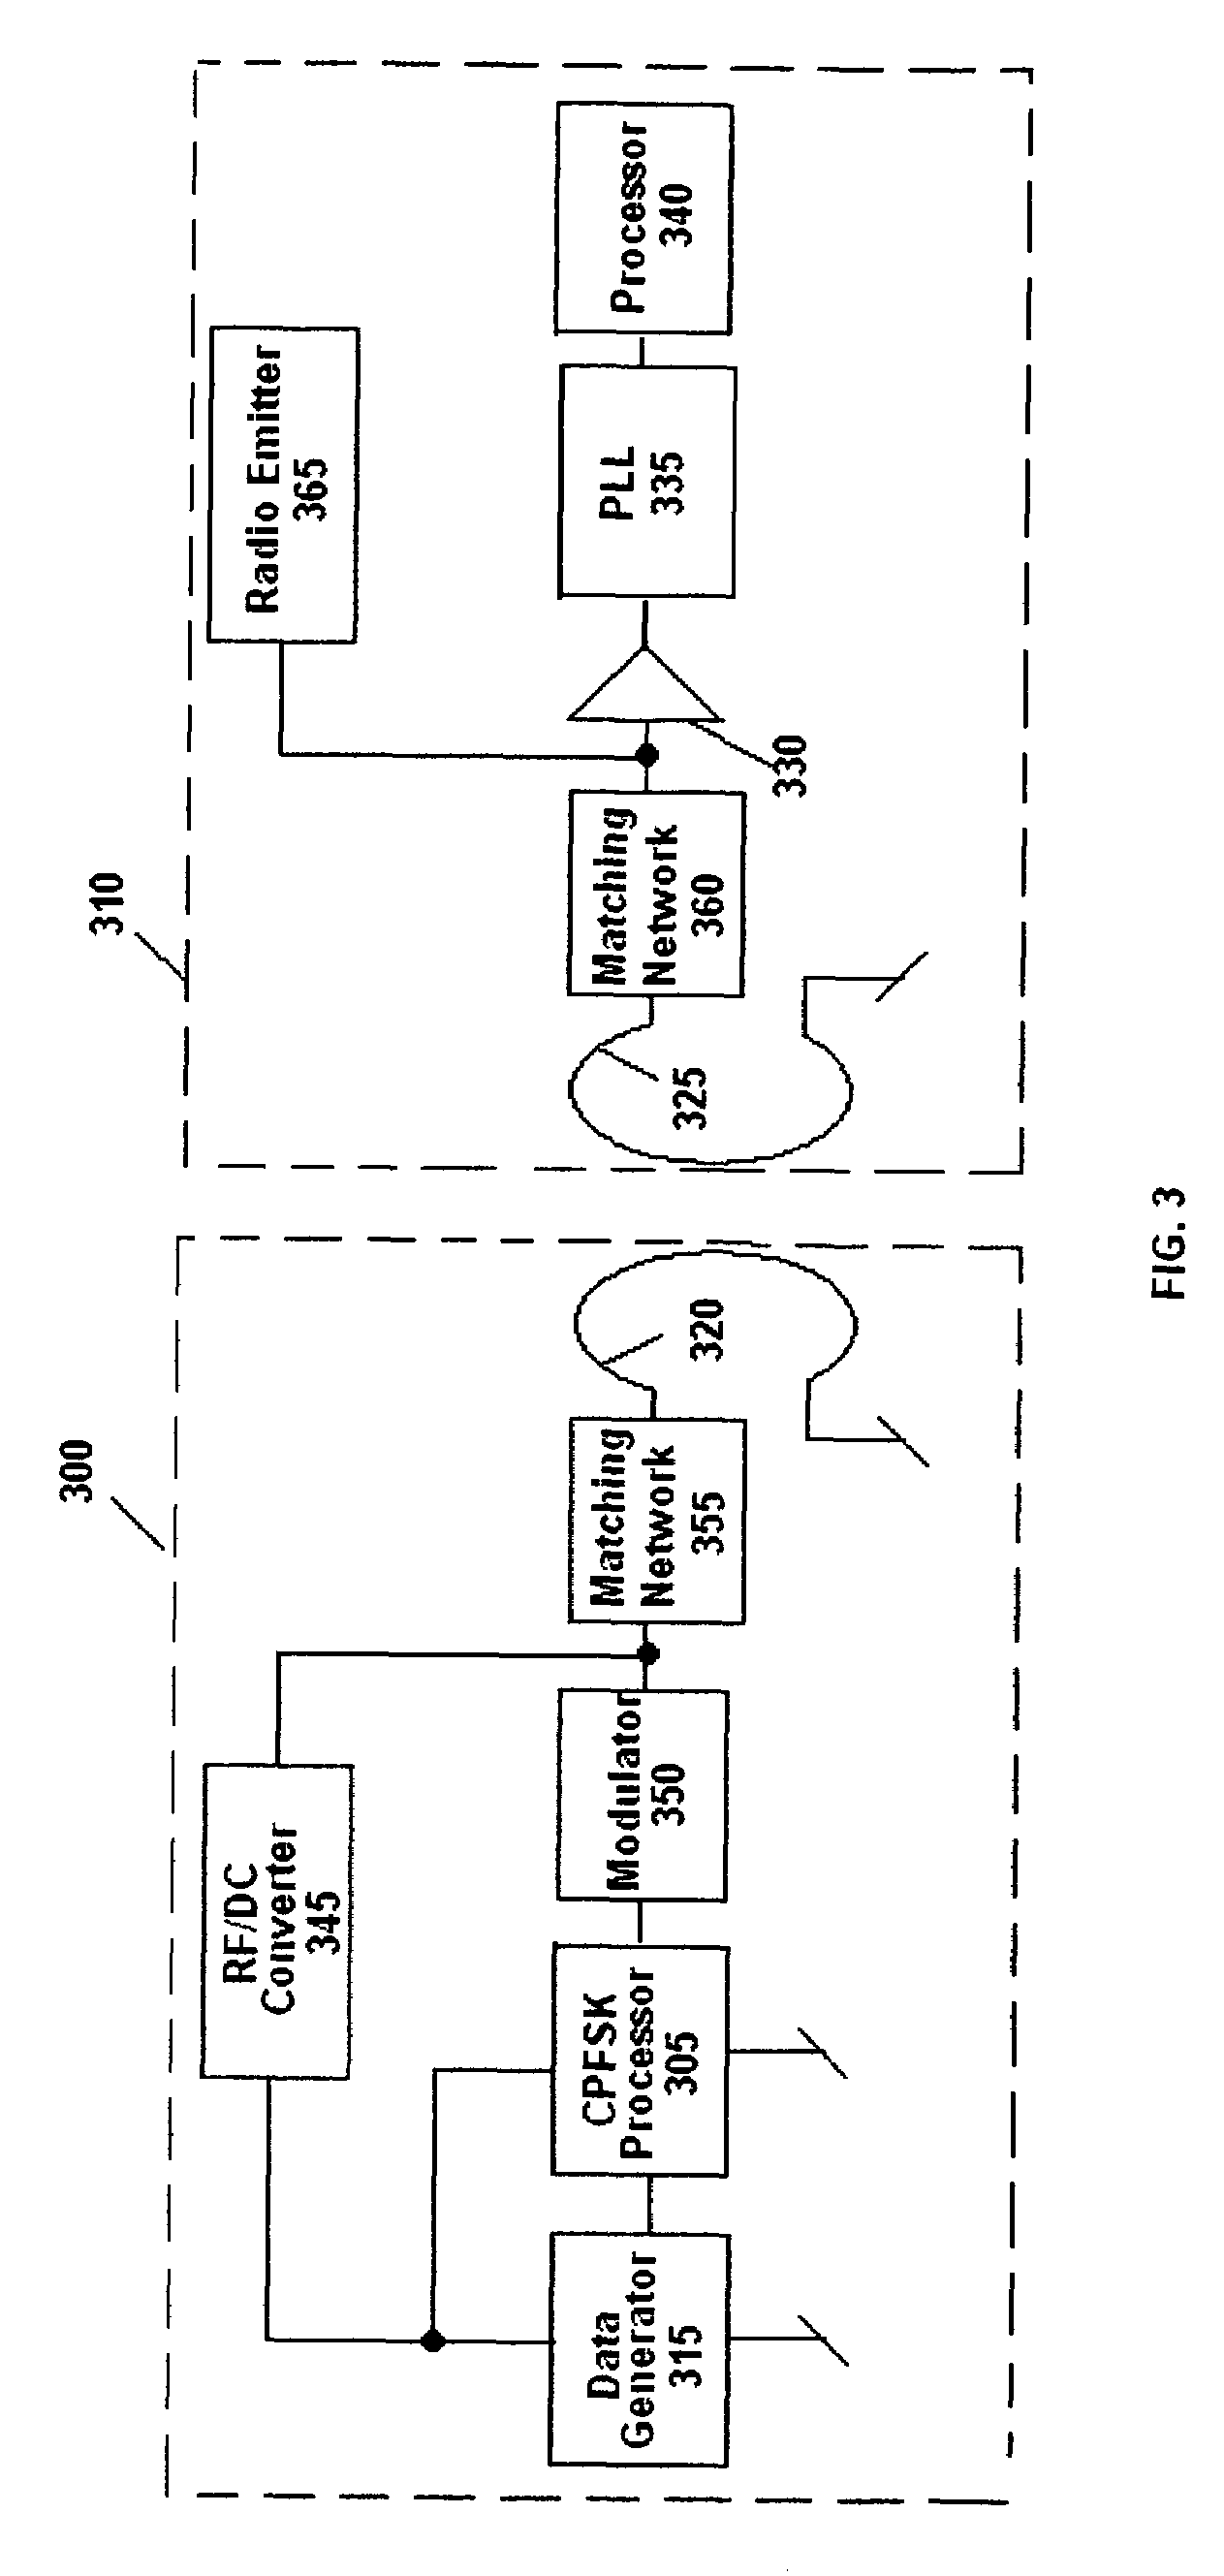 Continuous phase frequency shift keying modulation during wireless transmissions in a closed system while minimizing power consumption